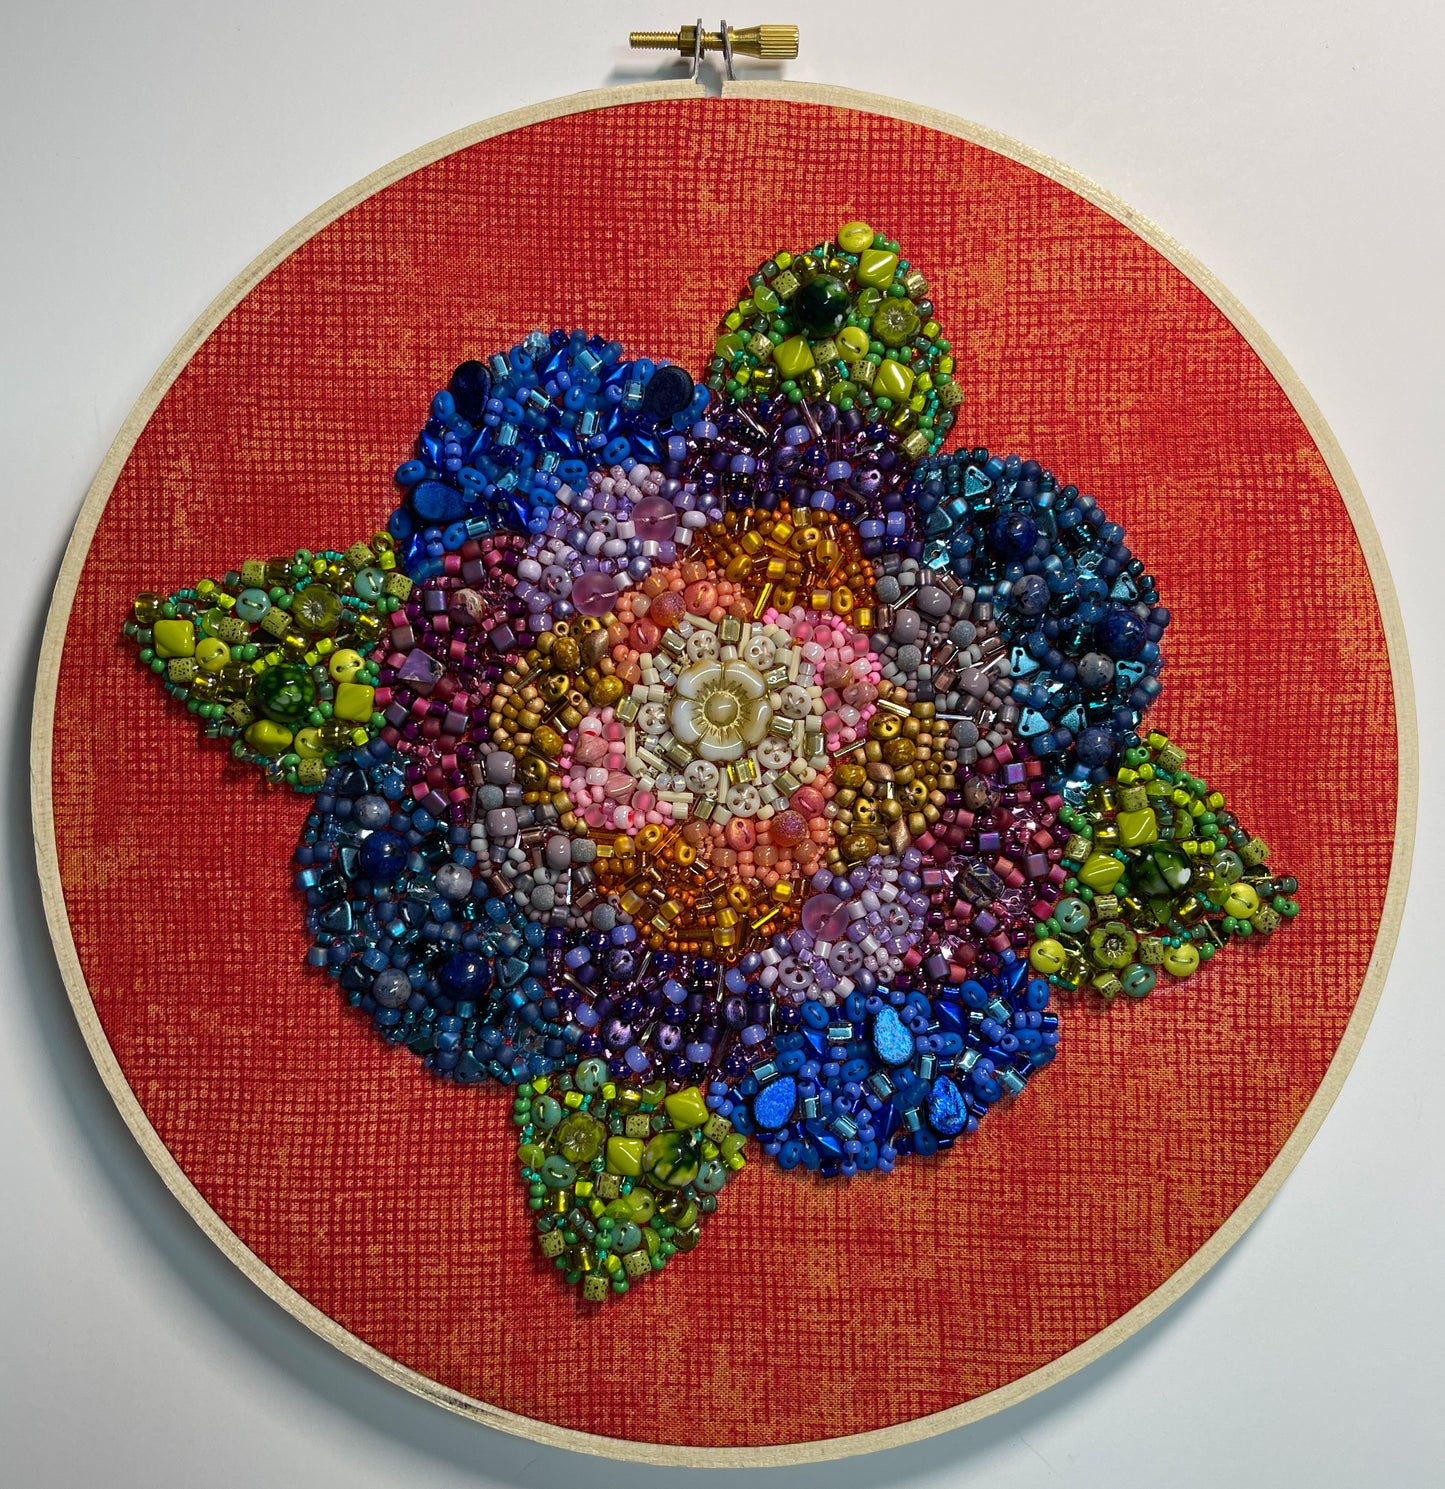 Needles Out! BOHO Embroidery: Mixed Media Techniques